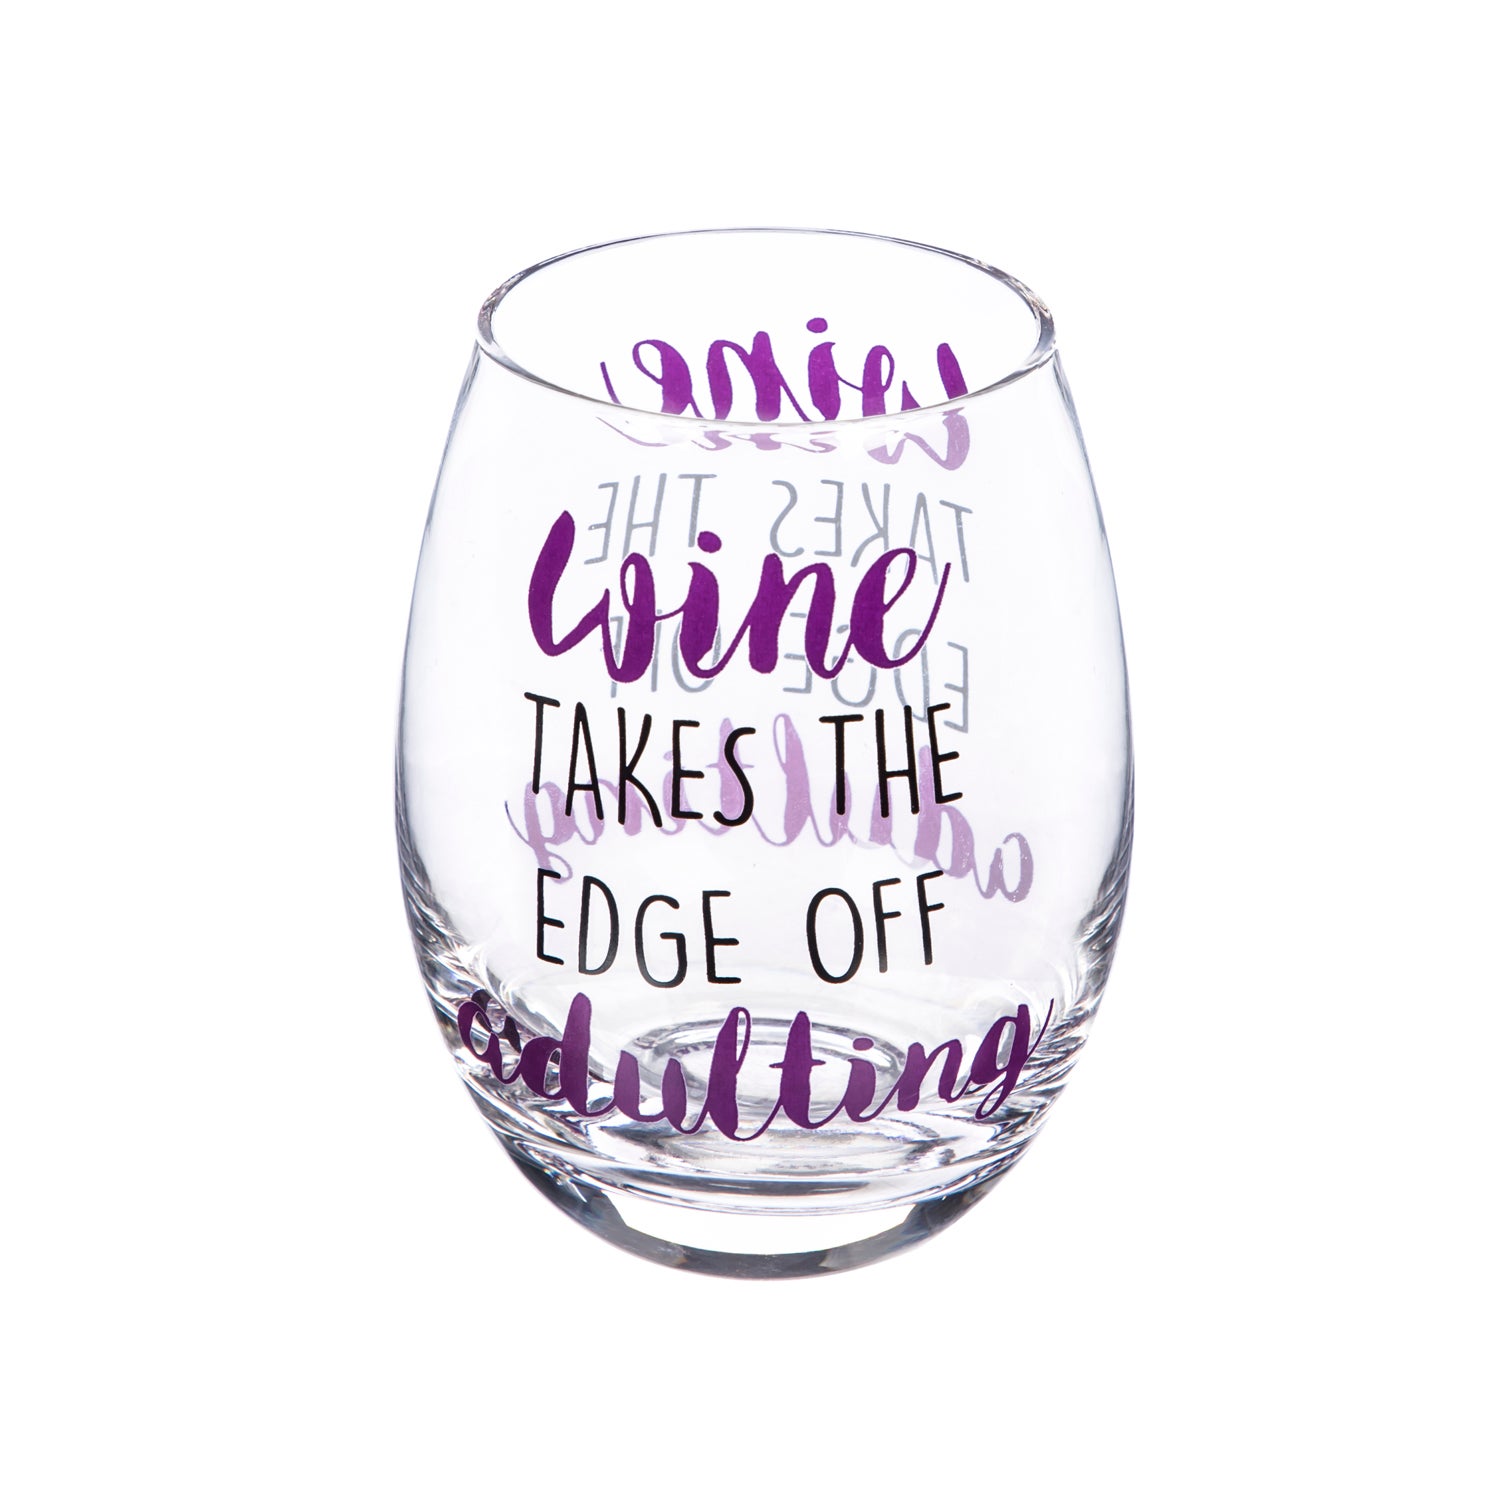 Wine Takes The Edge Off Adulting 17 OZ Stemless Wine Glass With Box